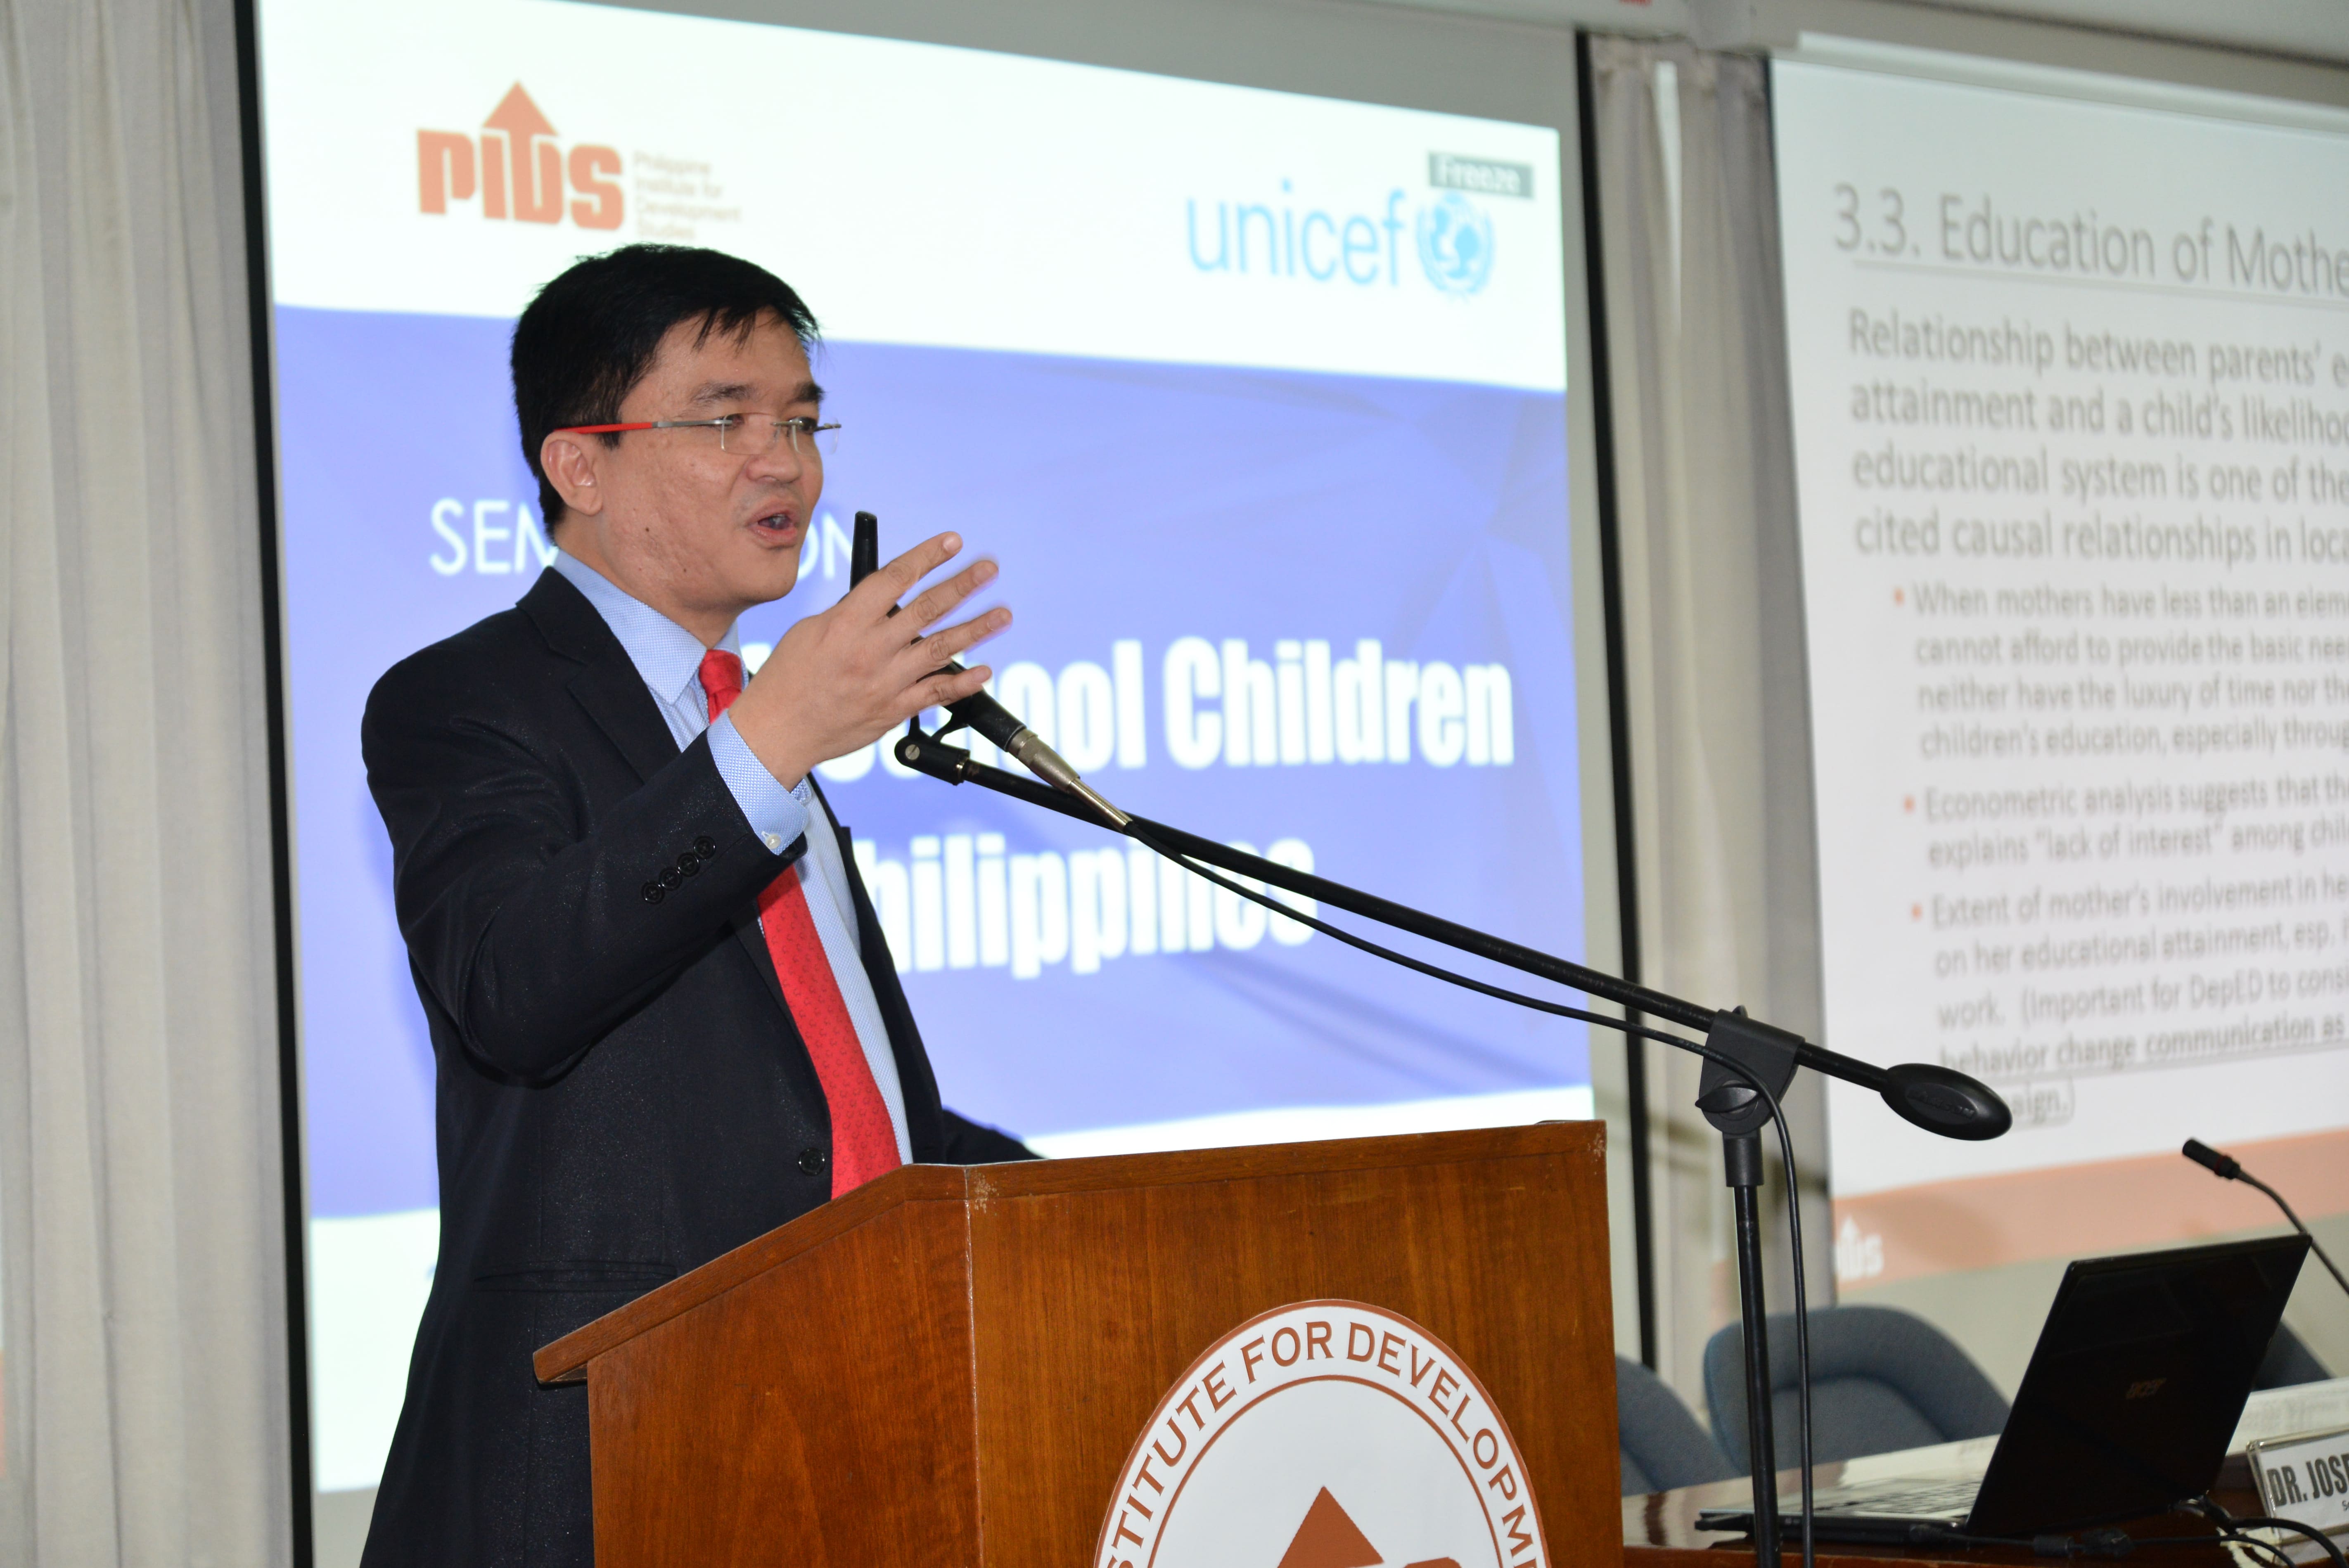 Seminar On Out-Of-School Children (OOSC) In The Philippines-DSC_3102.jpg